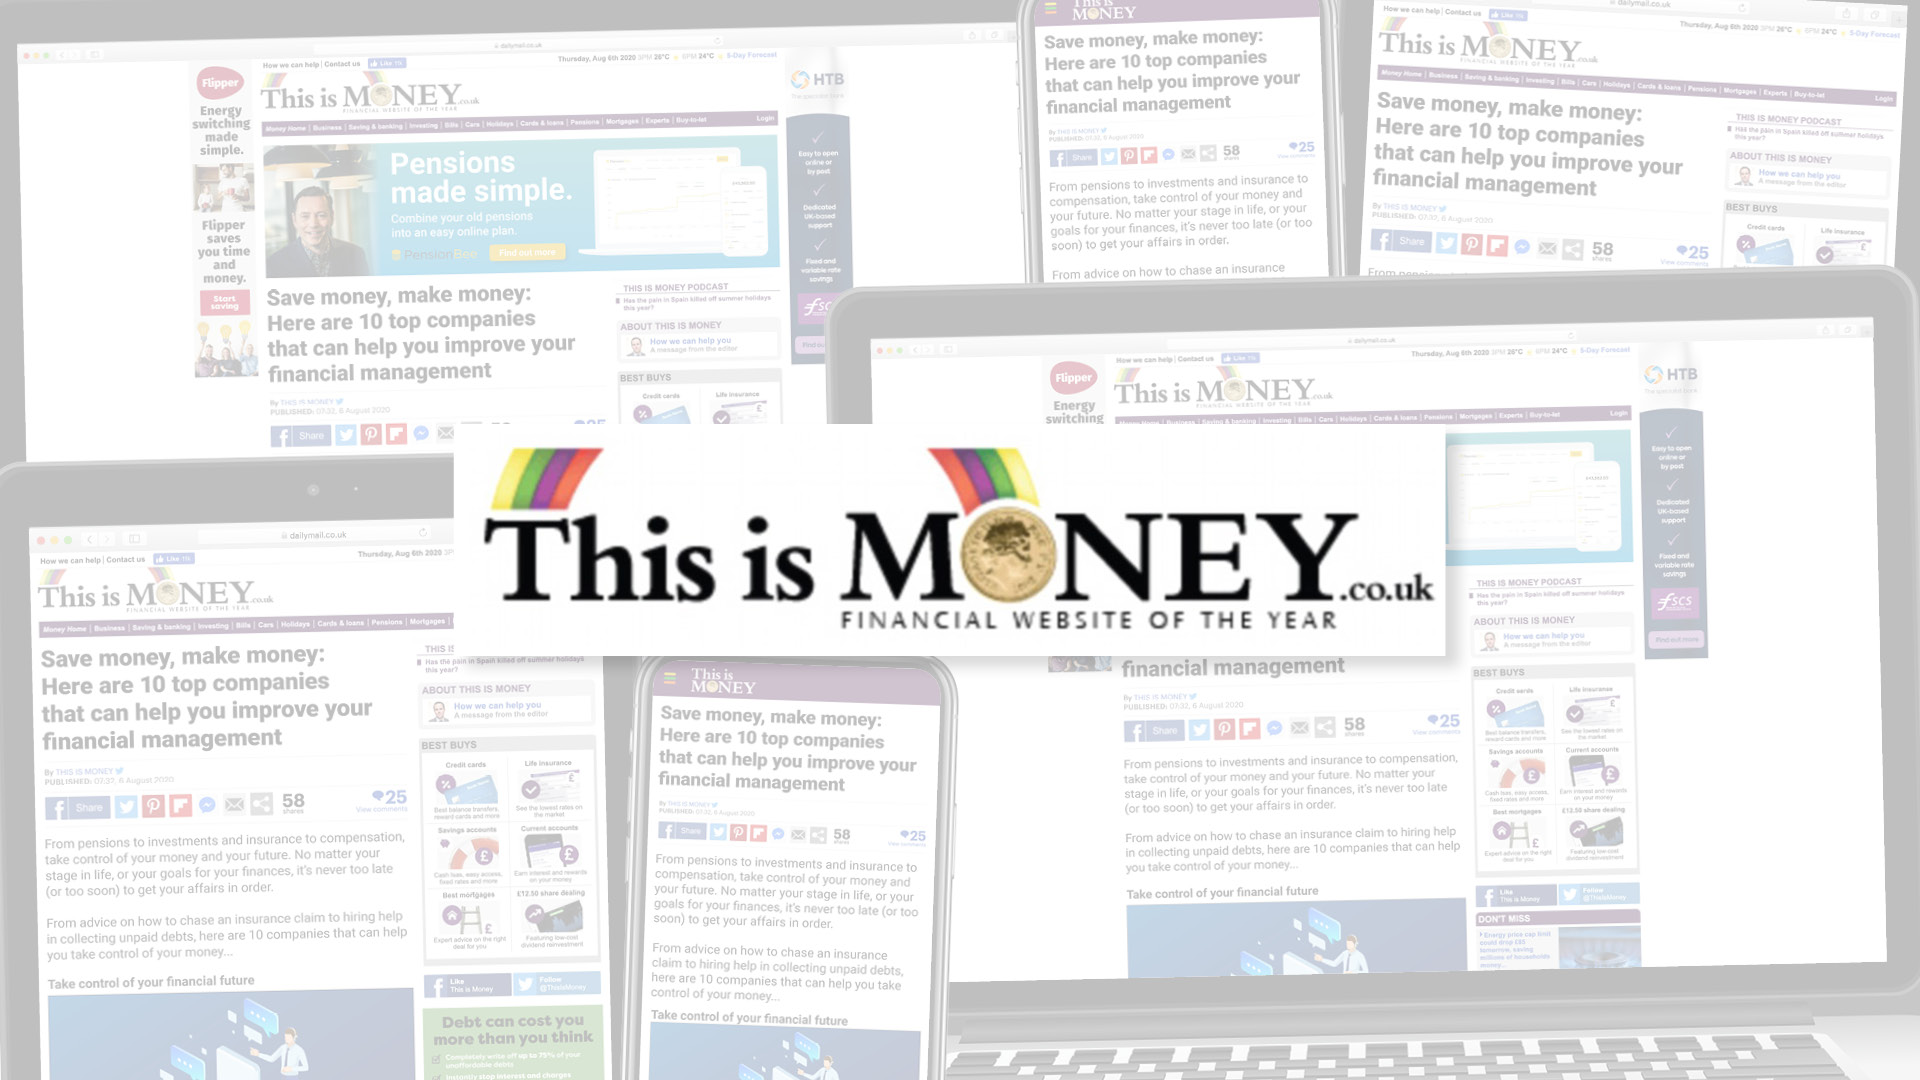 NEW THIS IS MONEY PARTNERSHIP TO BOOST FINANCE BRANDS